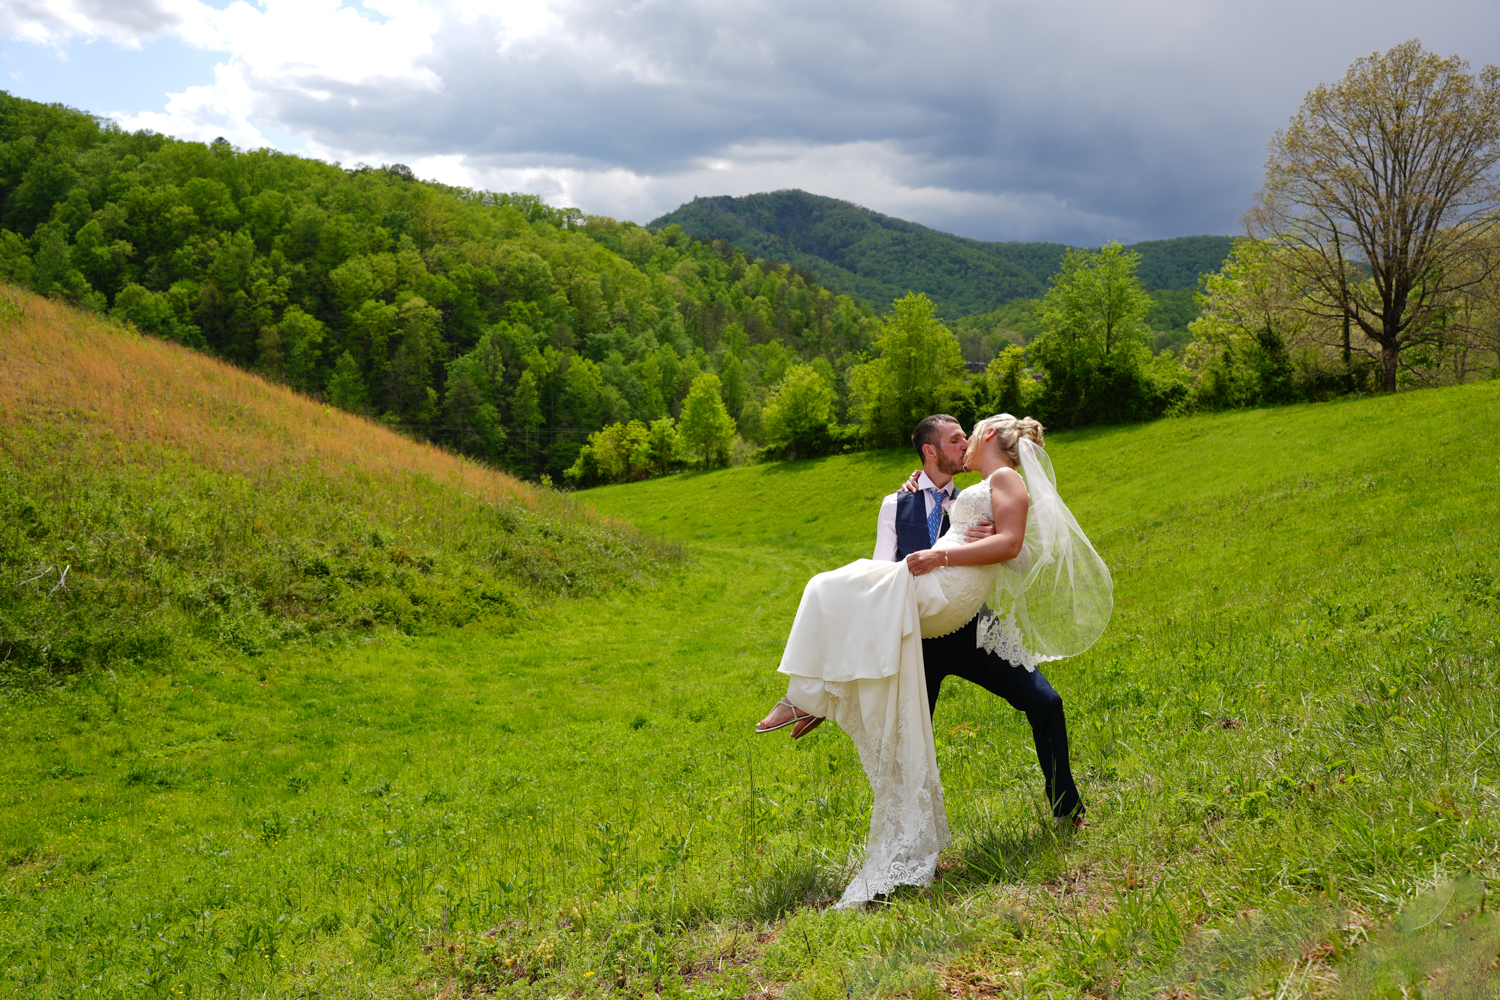 Groom holding his bride and kissing her as her veil blows in a meadow with a mountain view in Pigeon Forge at Honeysuckle Hills